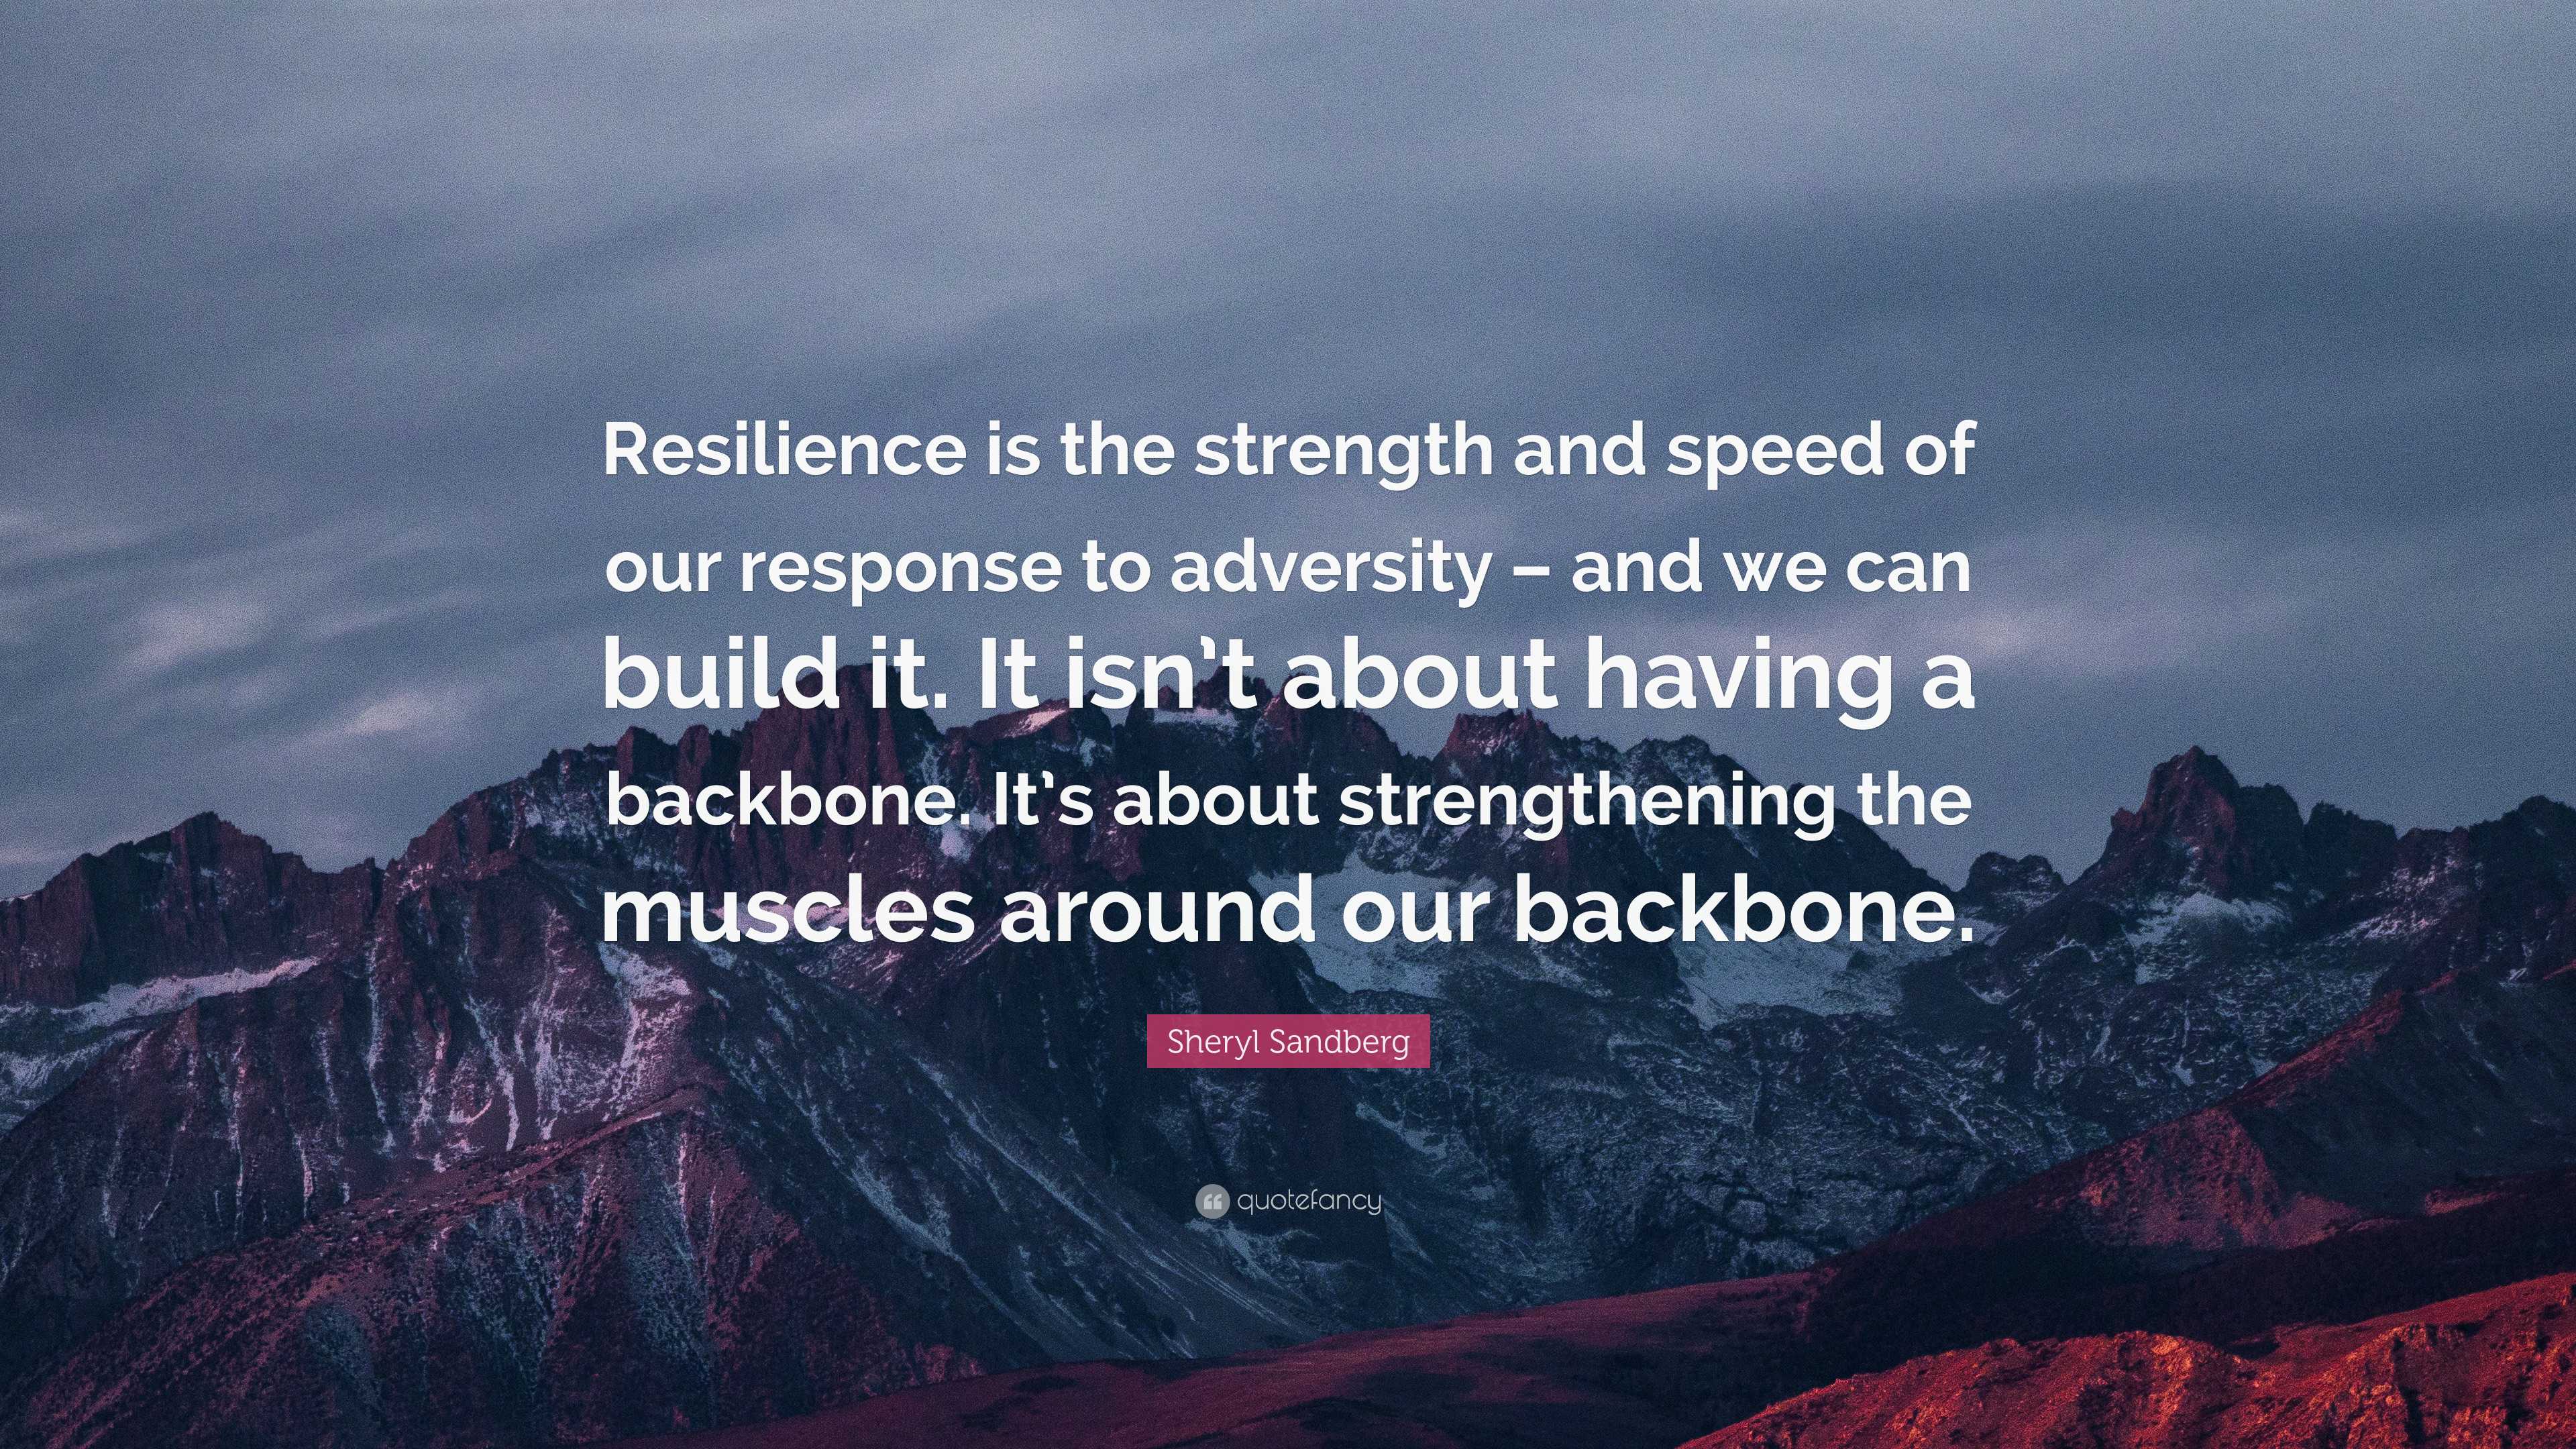 Sheryl Sandberg Quote: “Resilience is the strength and speed of our ...